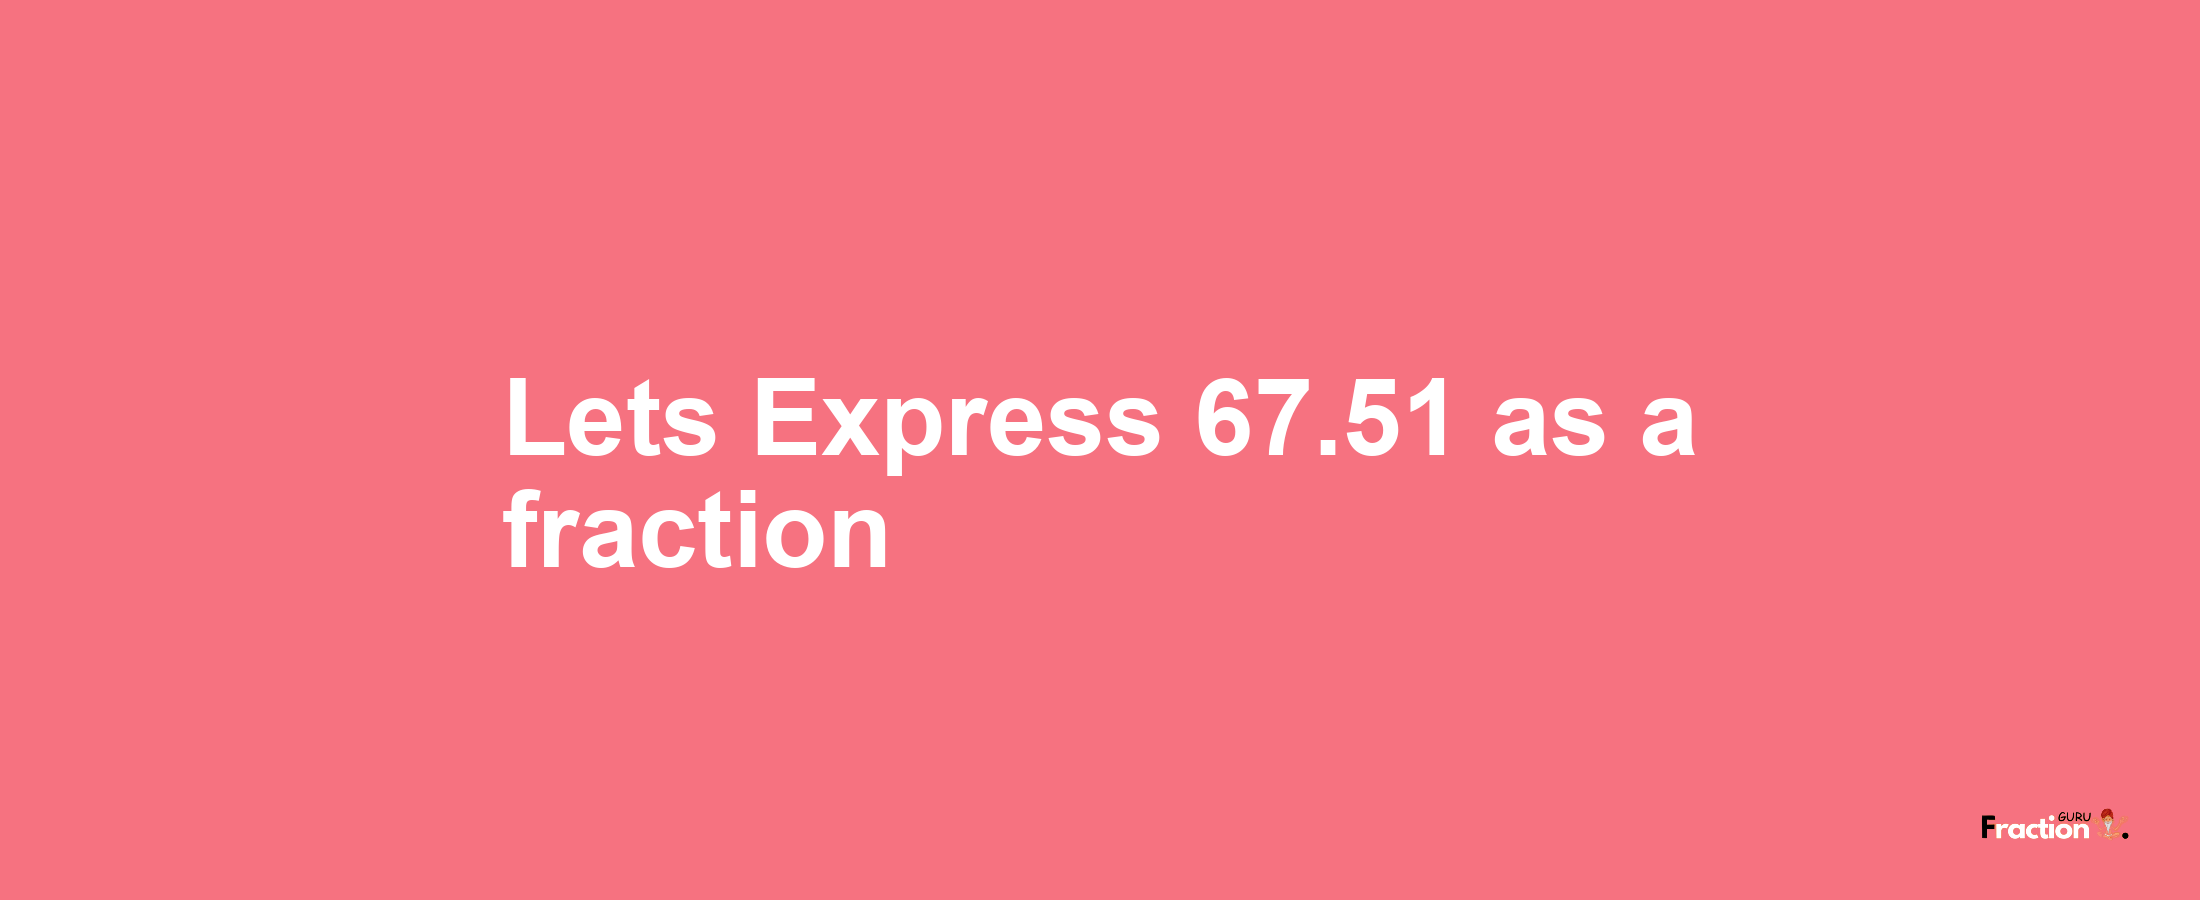 Lets Express 67.51 as afraction